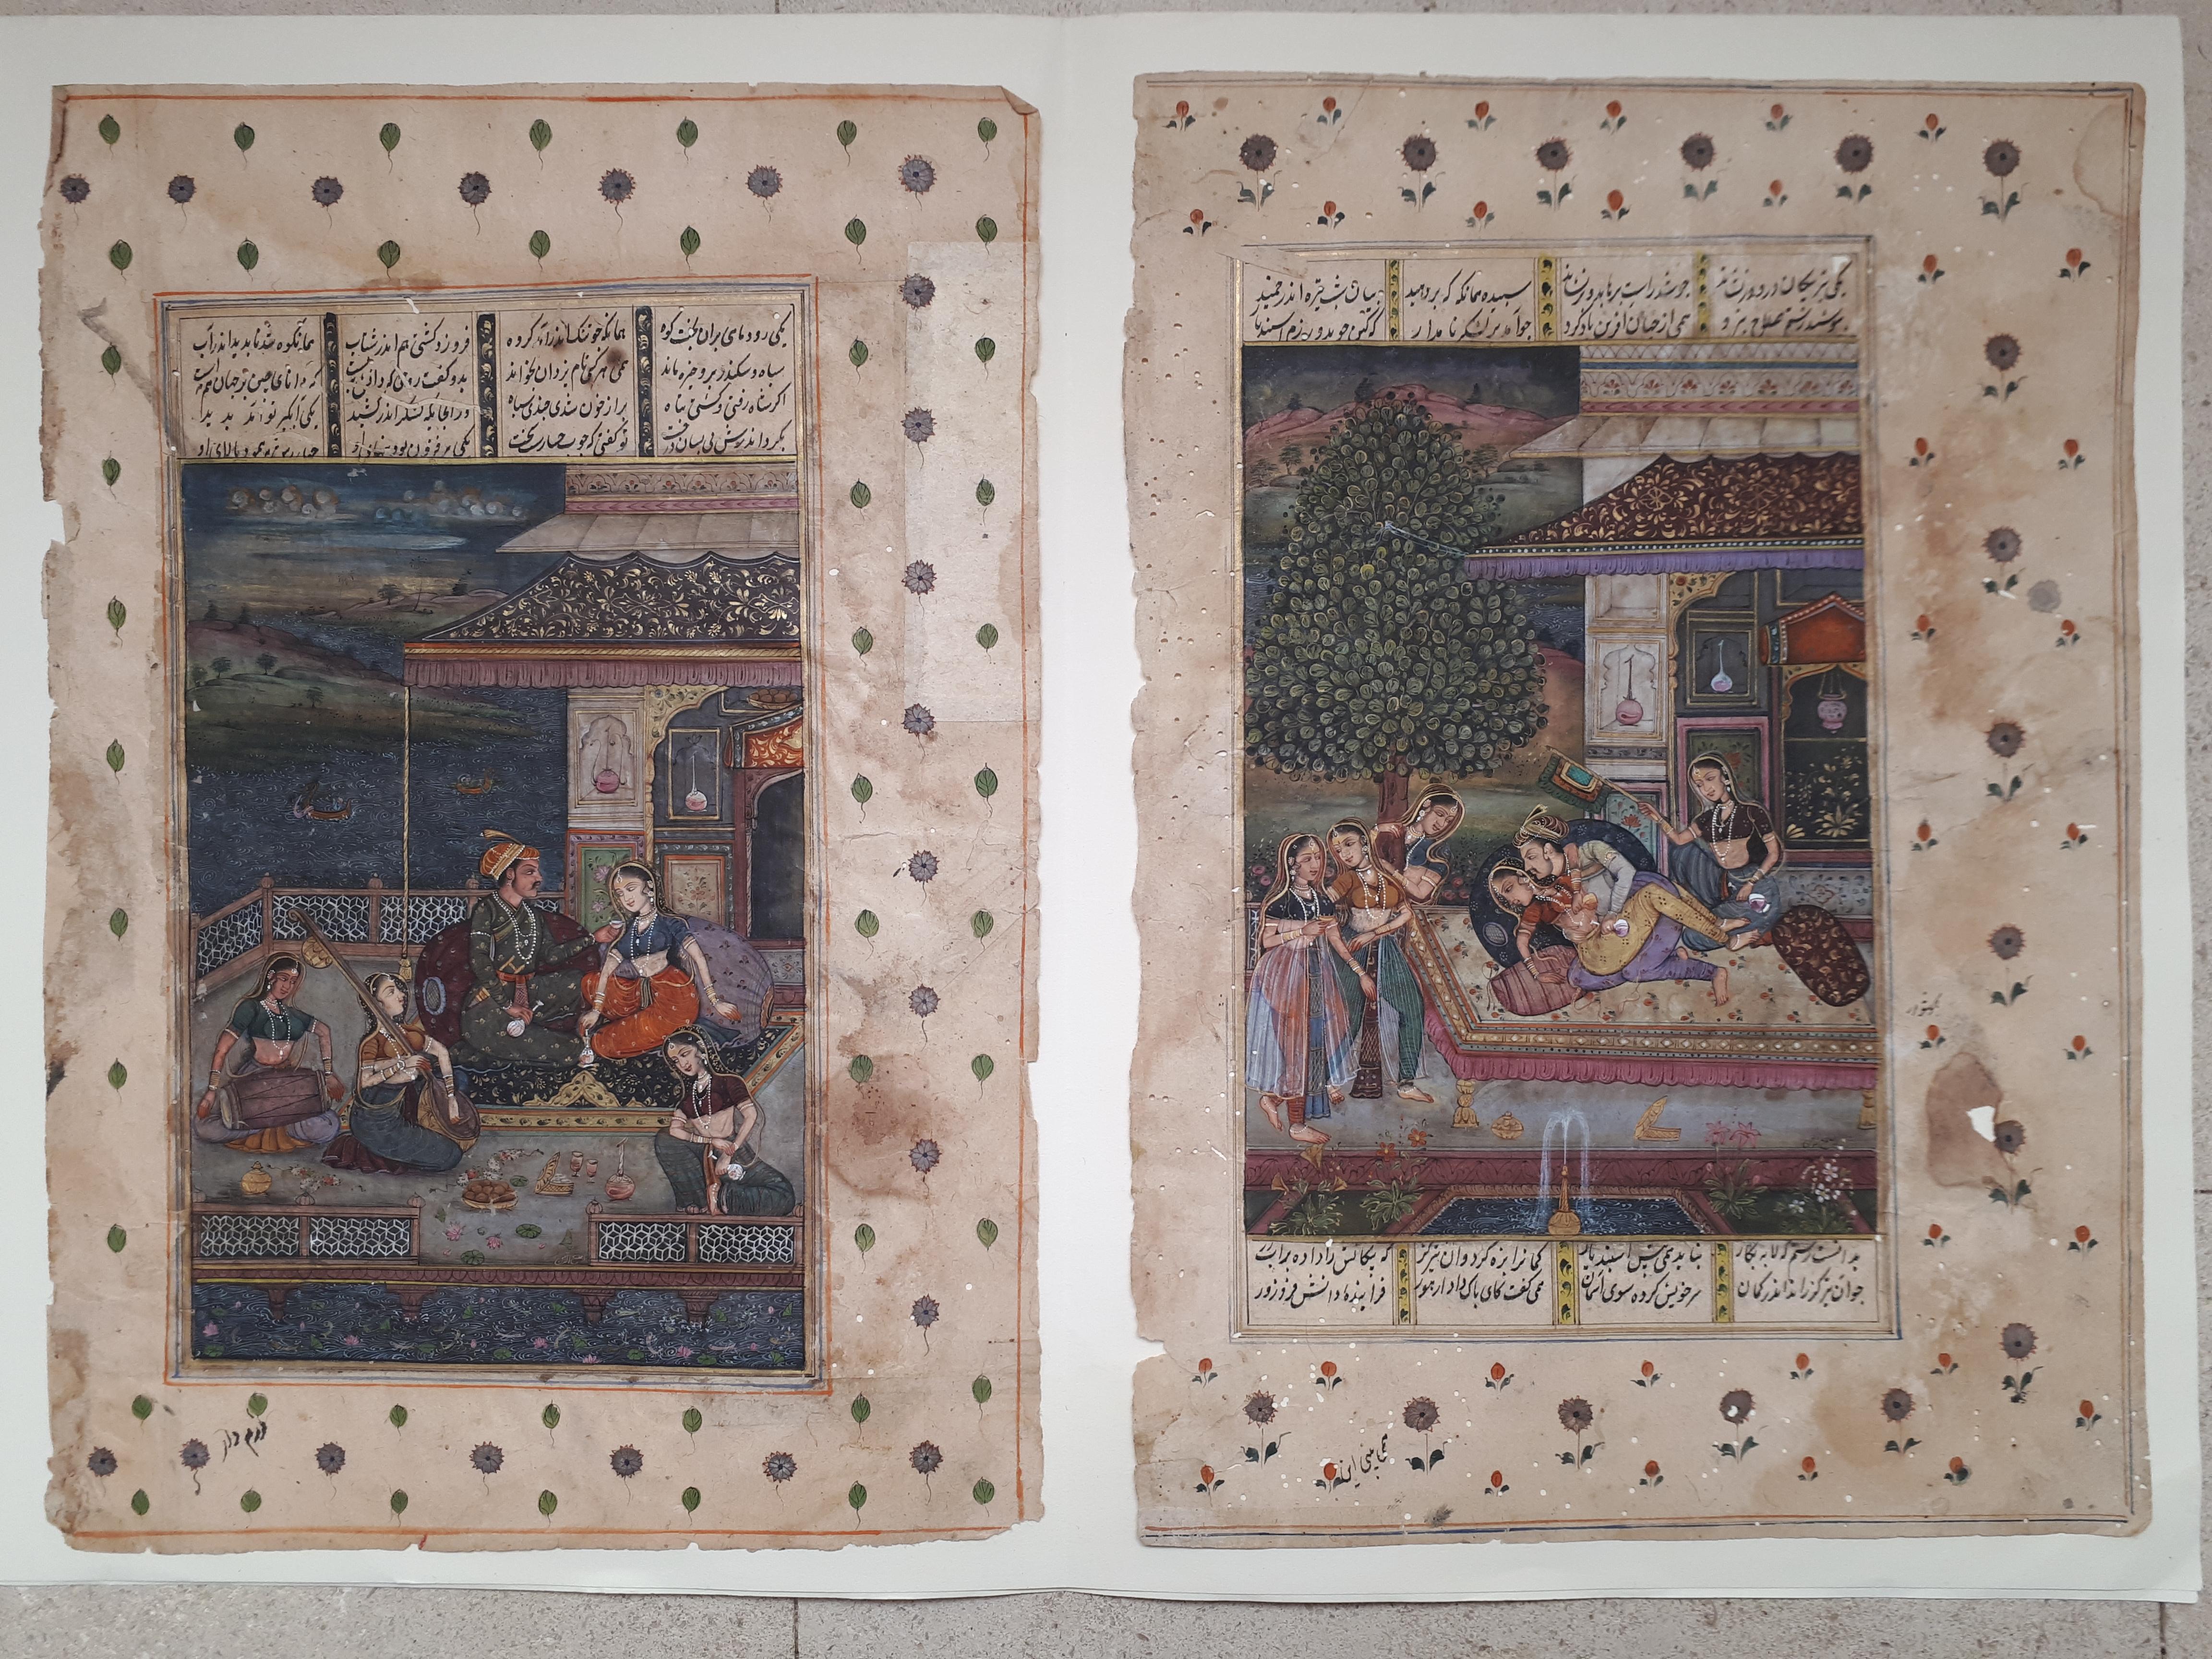 Two Indian miniatures representing gallant scenes, painted with extreme finesse !
Gouache, ink and gold highlights on paper.
Dimensions of the miniatures alone : 14 x 20 cm.